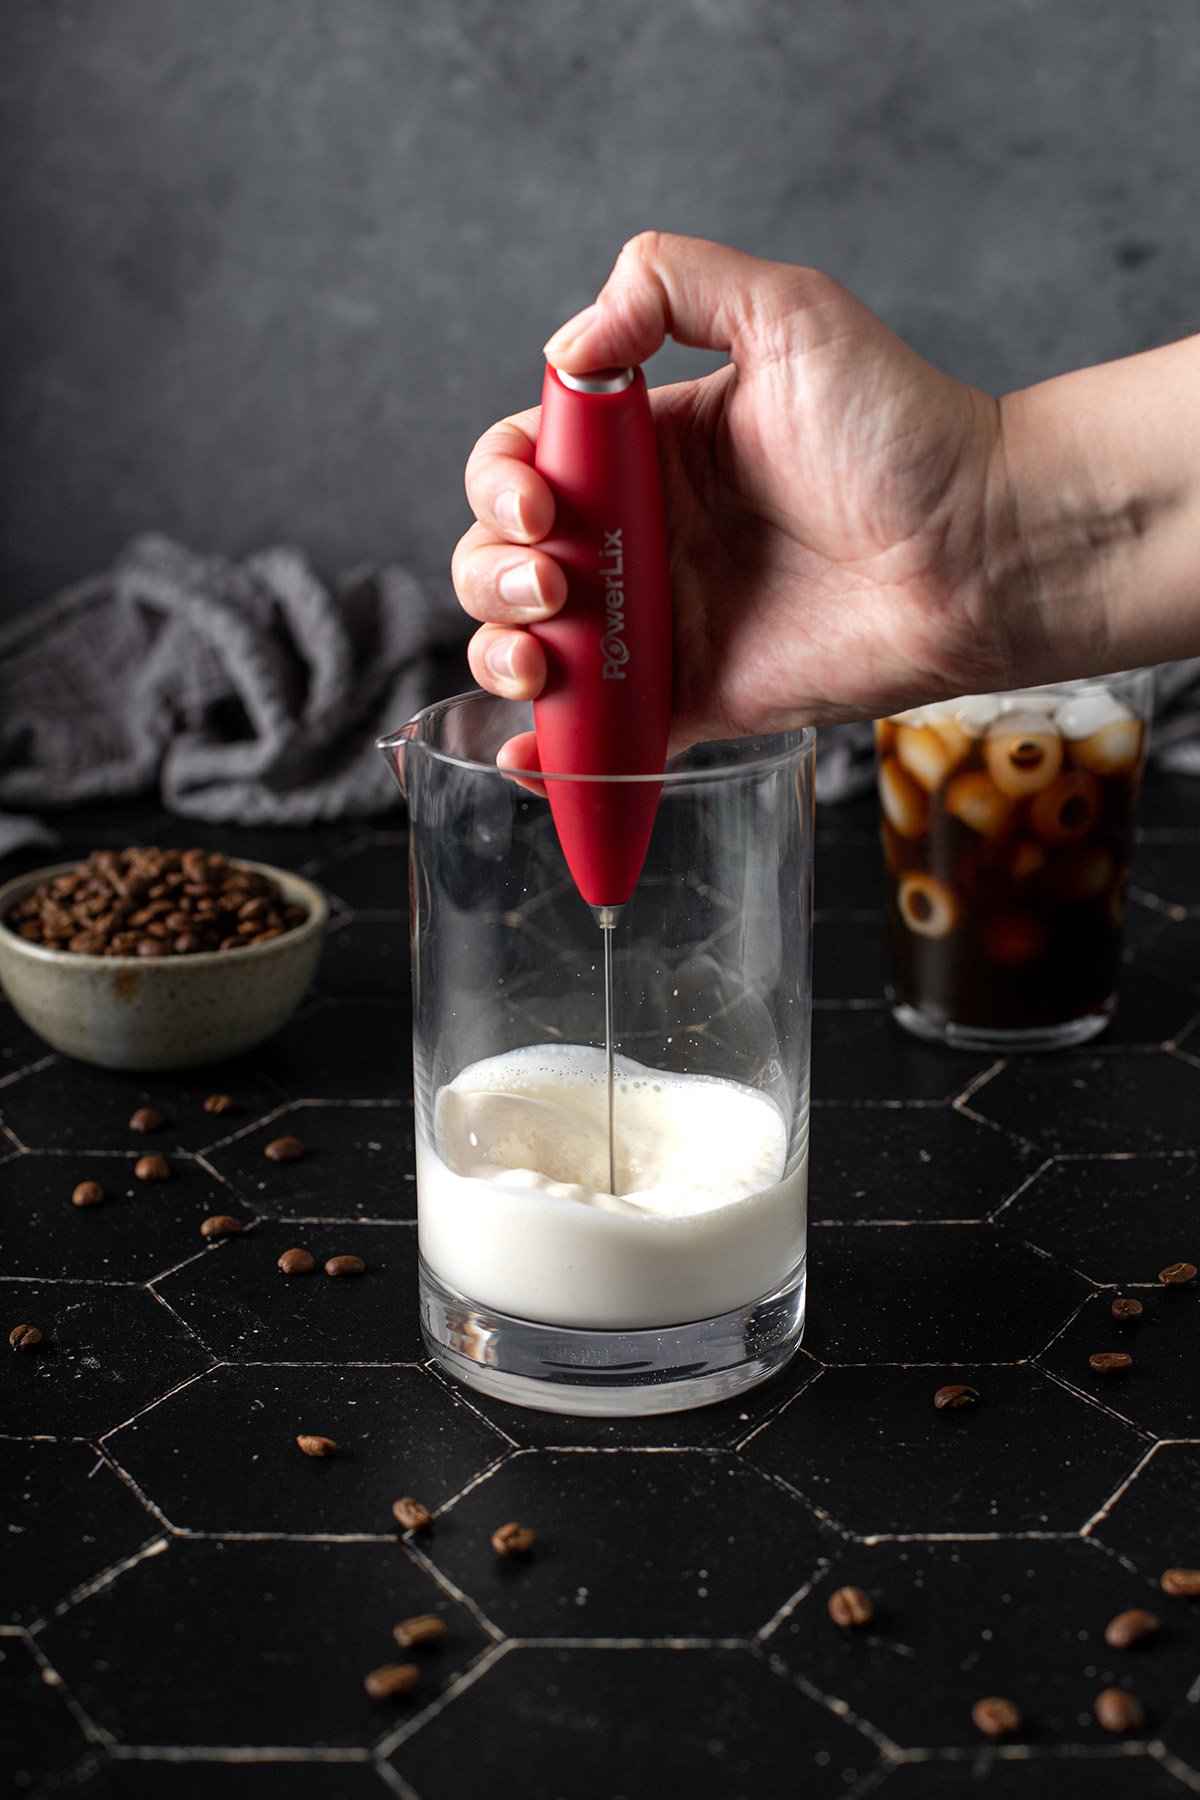 a hand holds a milk frother, frothing liquid in a glass container.